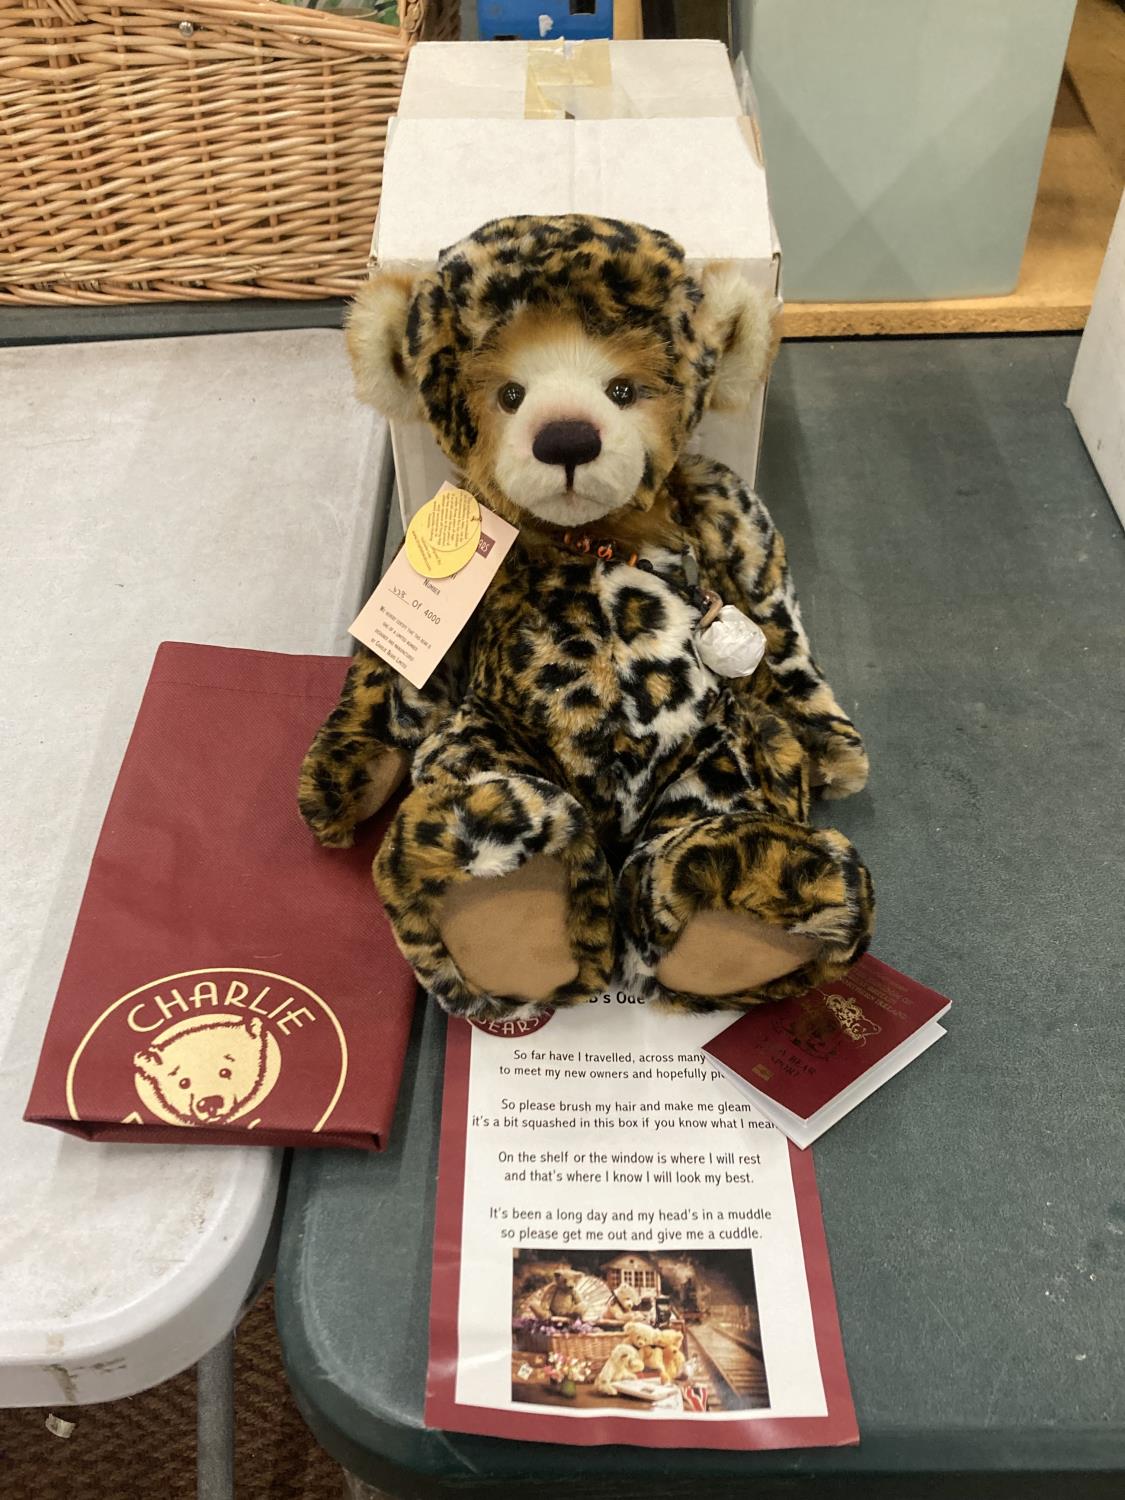 A LIMITED EDITION 638/4000 CHARLIE BEAR 'SURBHI' COMPLETE WITH BAG, PASSPORT AND CERTIFICATE OF